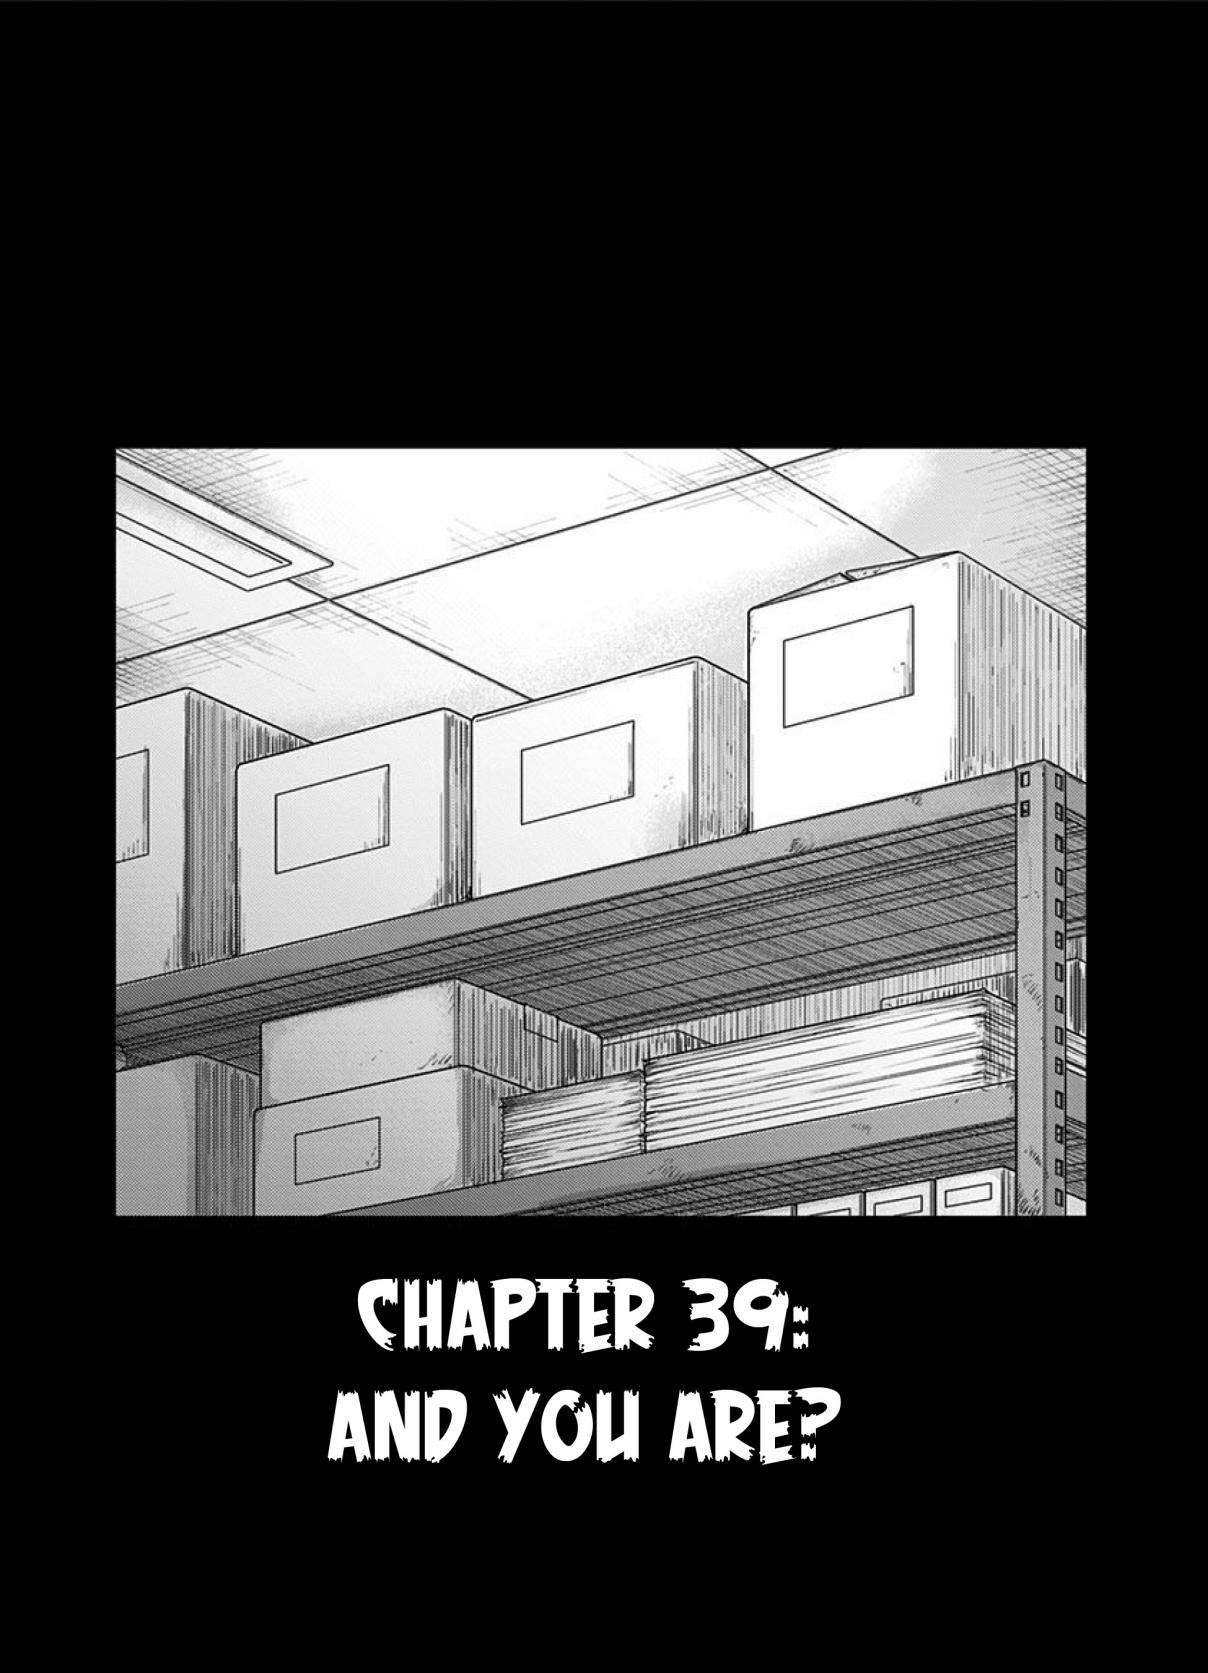 Route End Vol. 6 Ch. 39 And You Are?